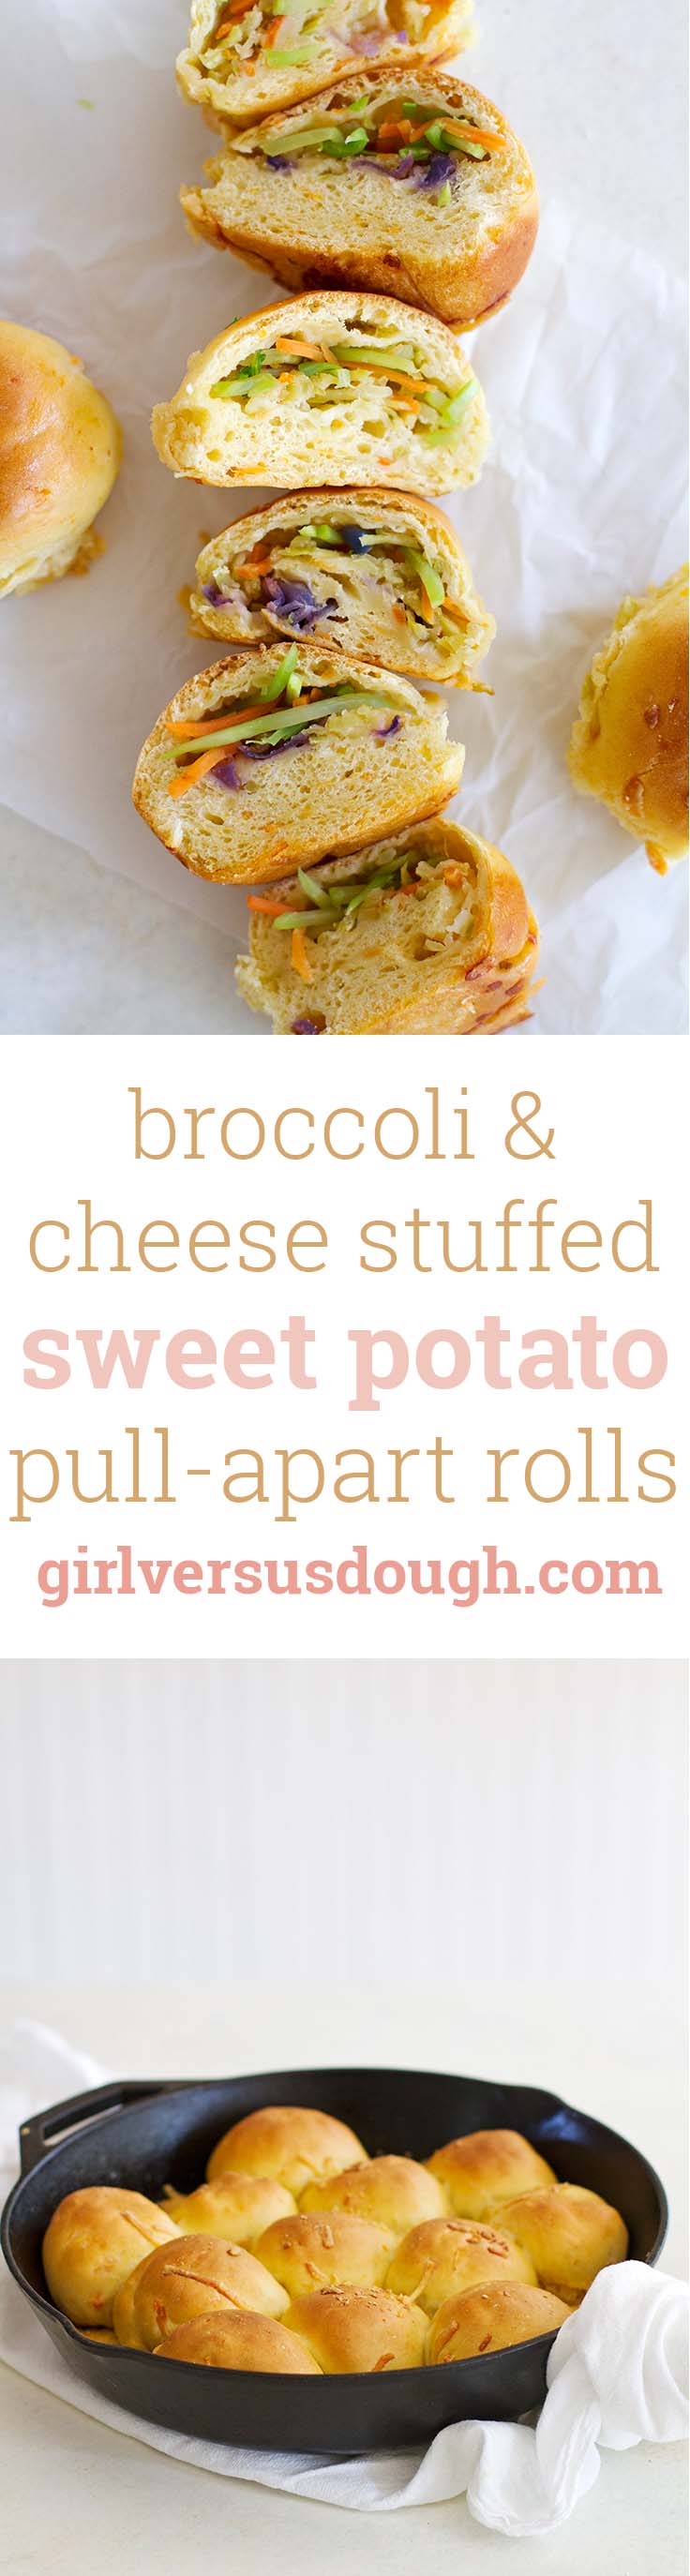 Broccoli and Cheese Stuffed Pull-Apart Sweet Potato Rolls -- Easy and delicious skillet rolls filled with fresh veggies and melted cheese. www.girlversusdough.com @girlversusdough